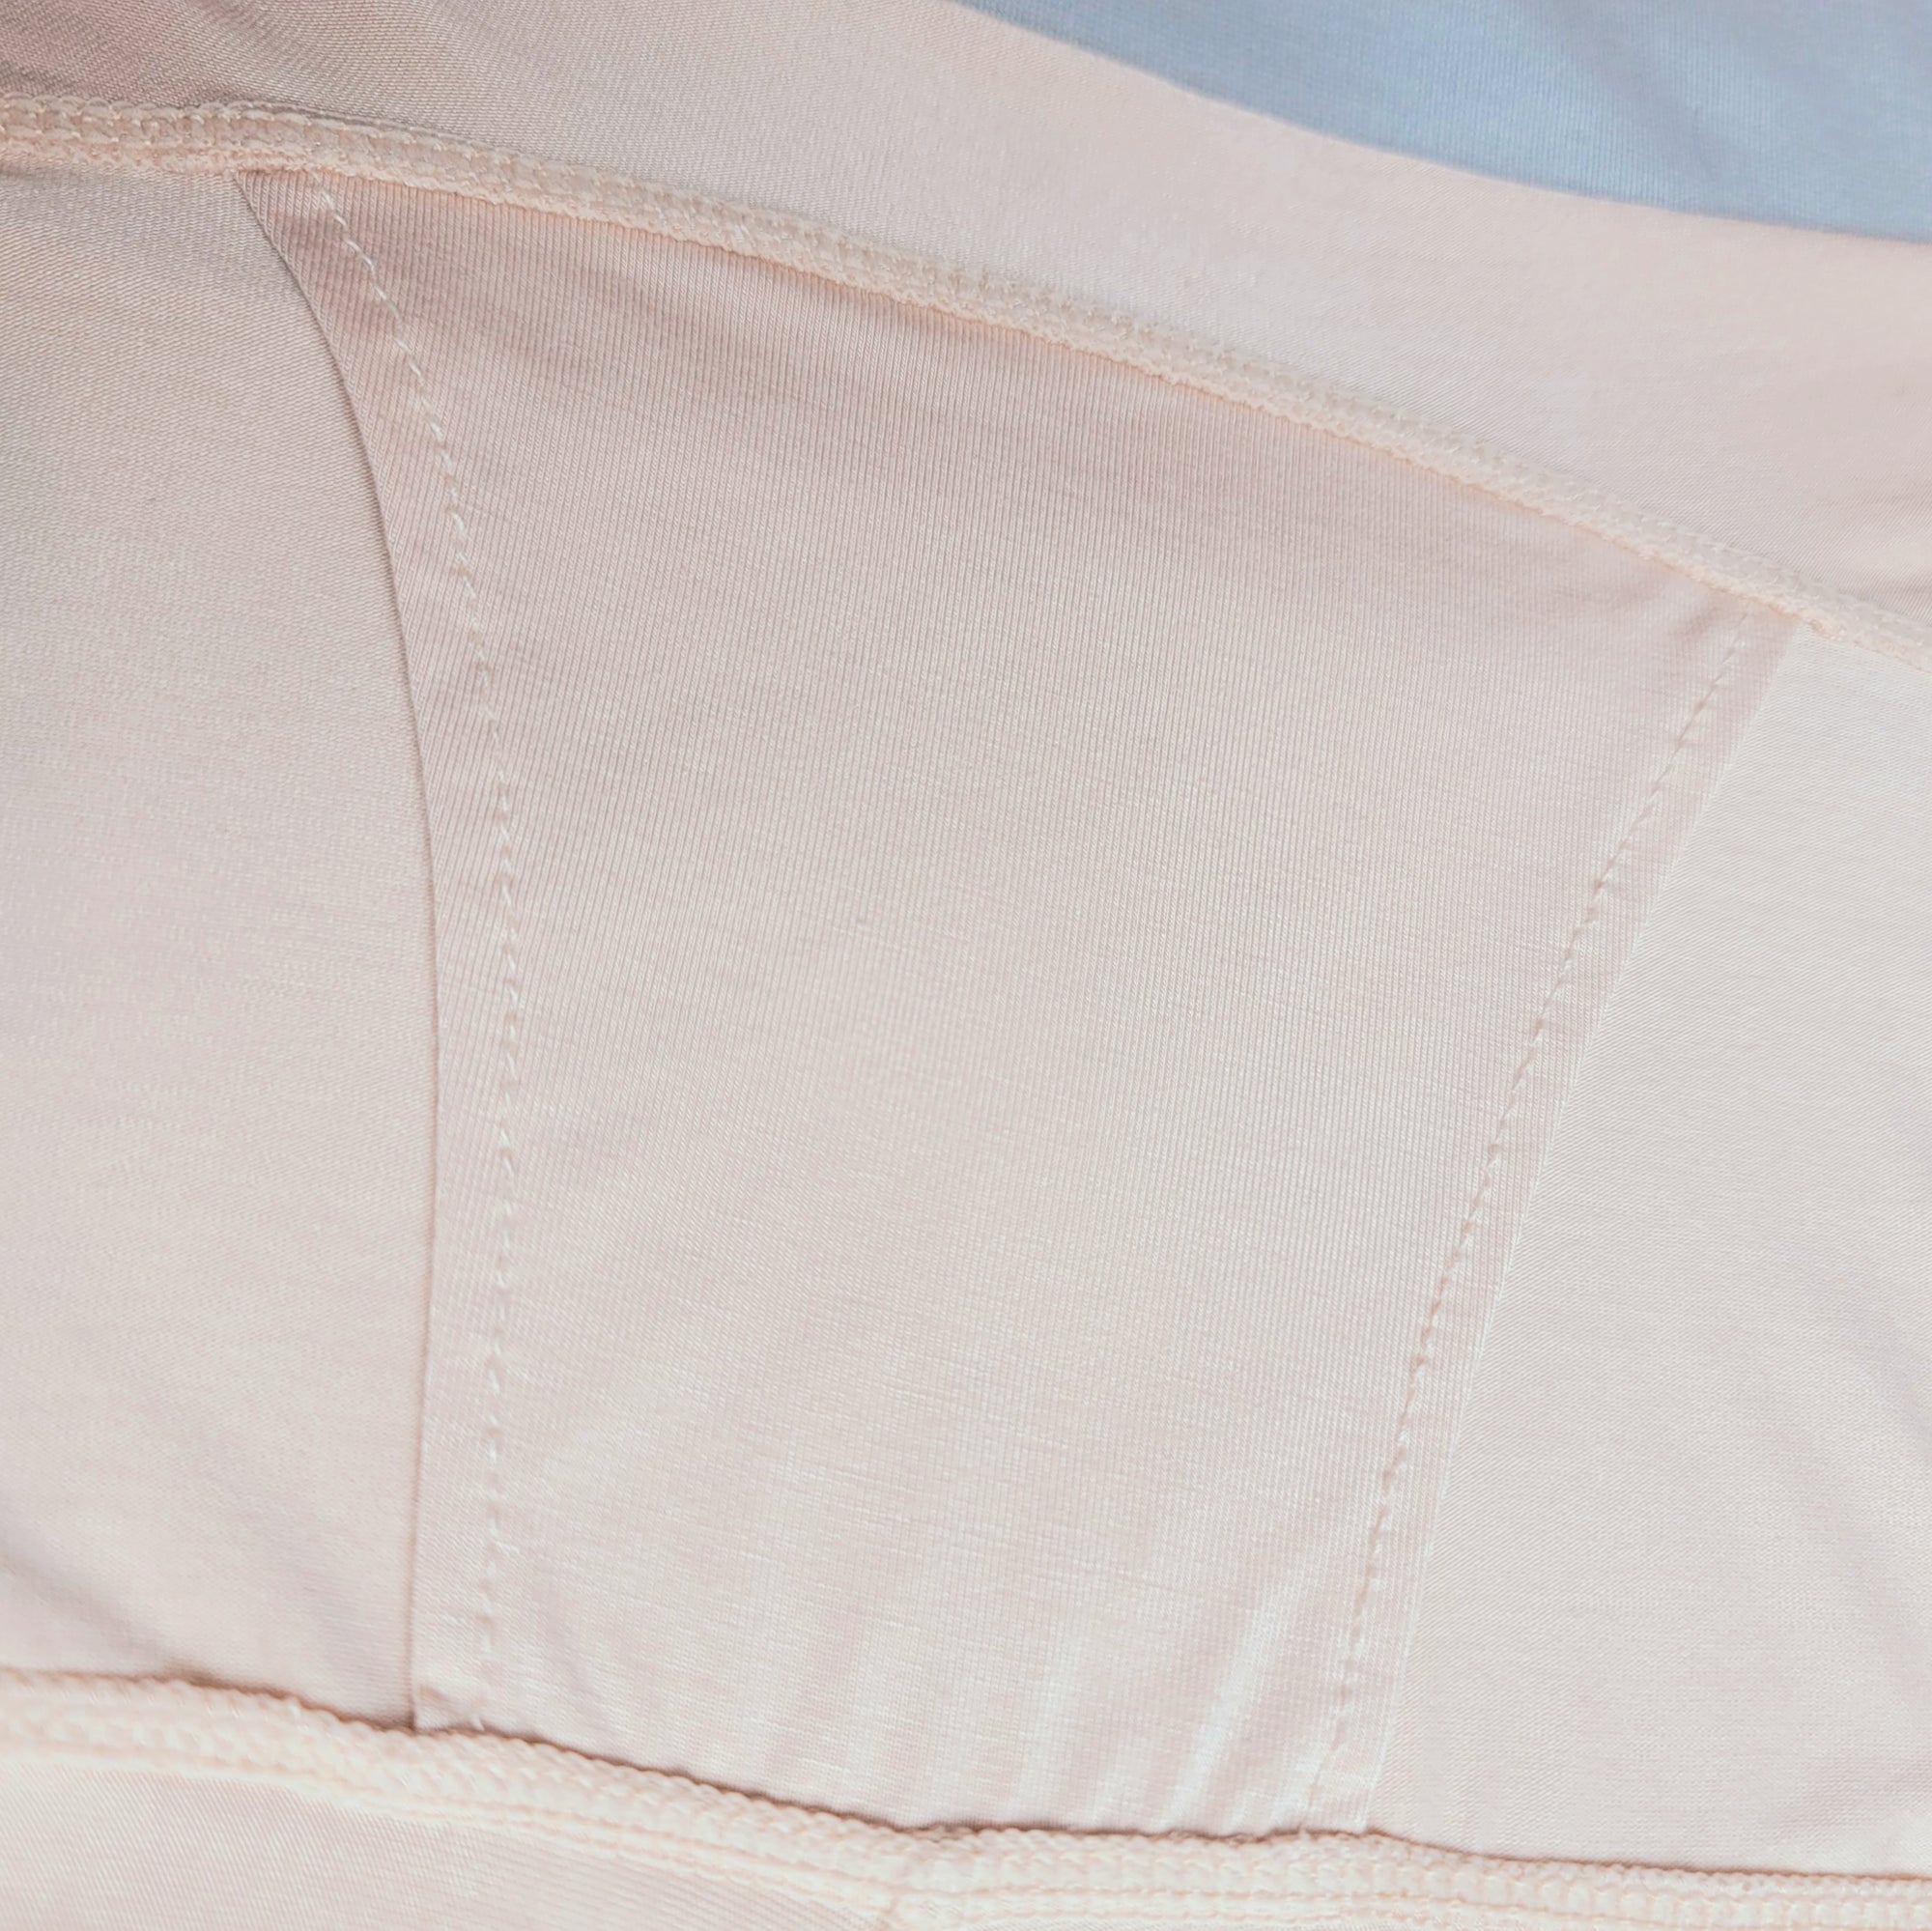 Bamboo Underwear by Indoor Outfit: Ultrathin Cotton Gusset. Bamboo Underwear features a cotton gusset to put sanitary pads in-between.